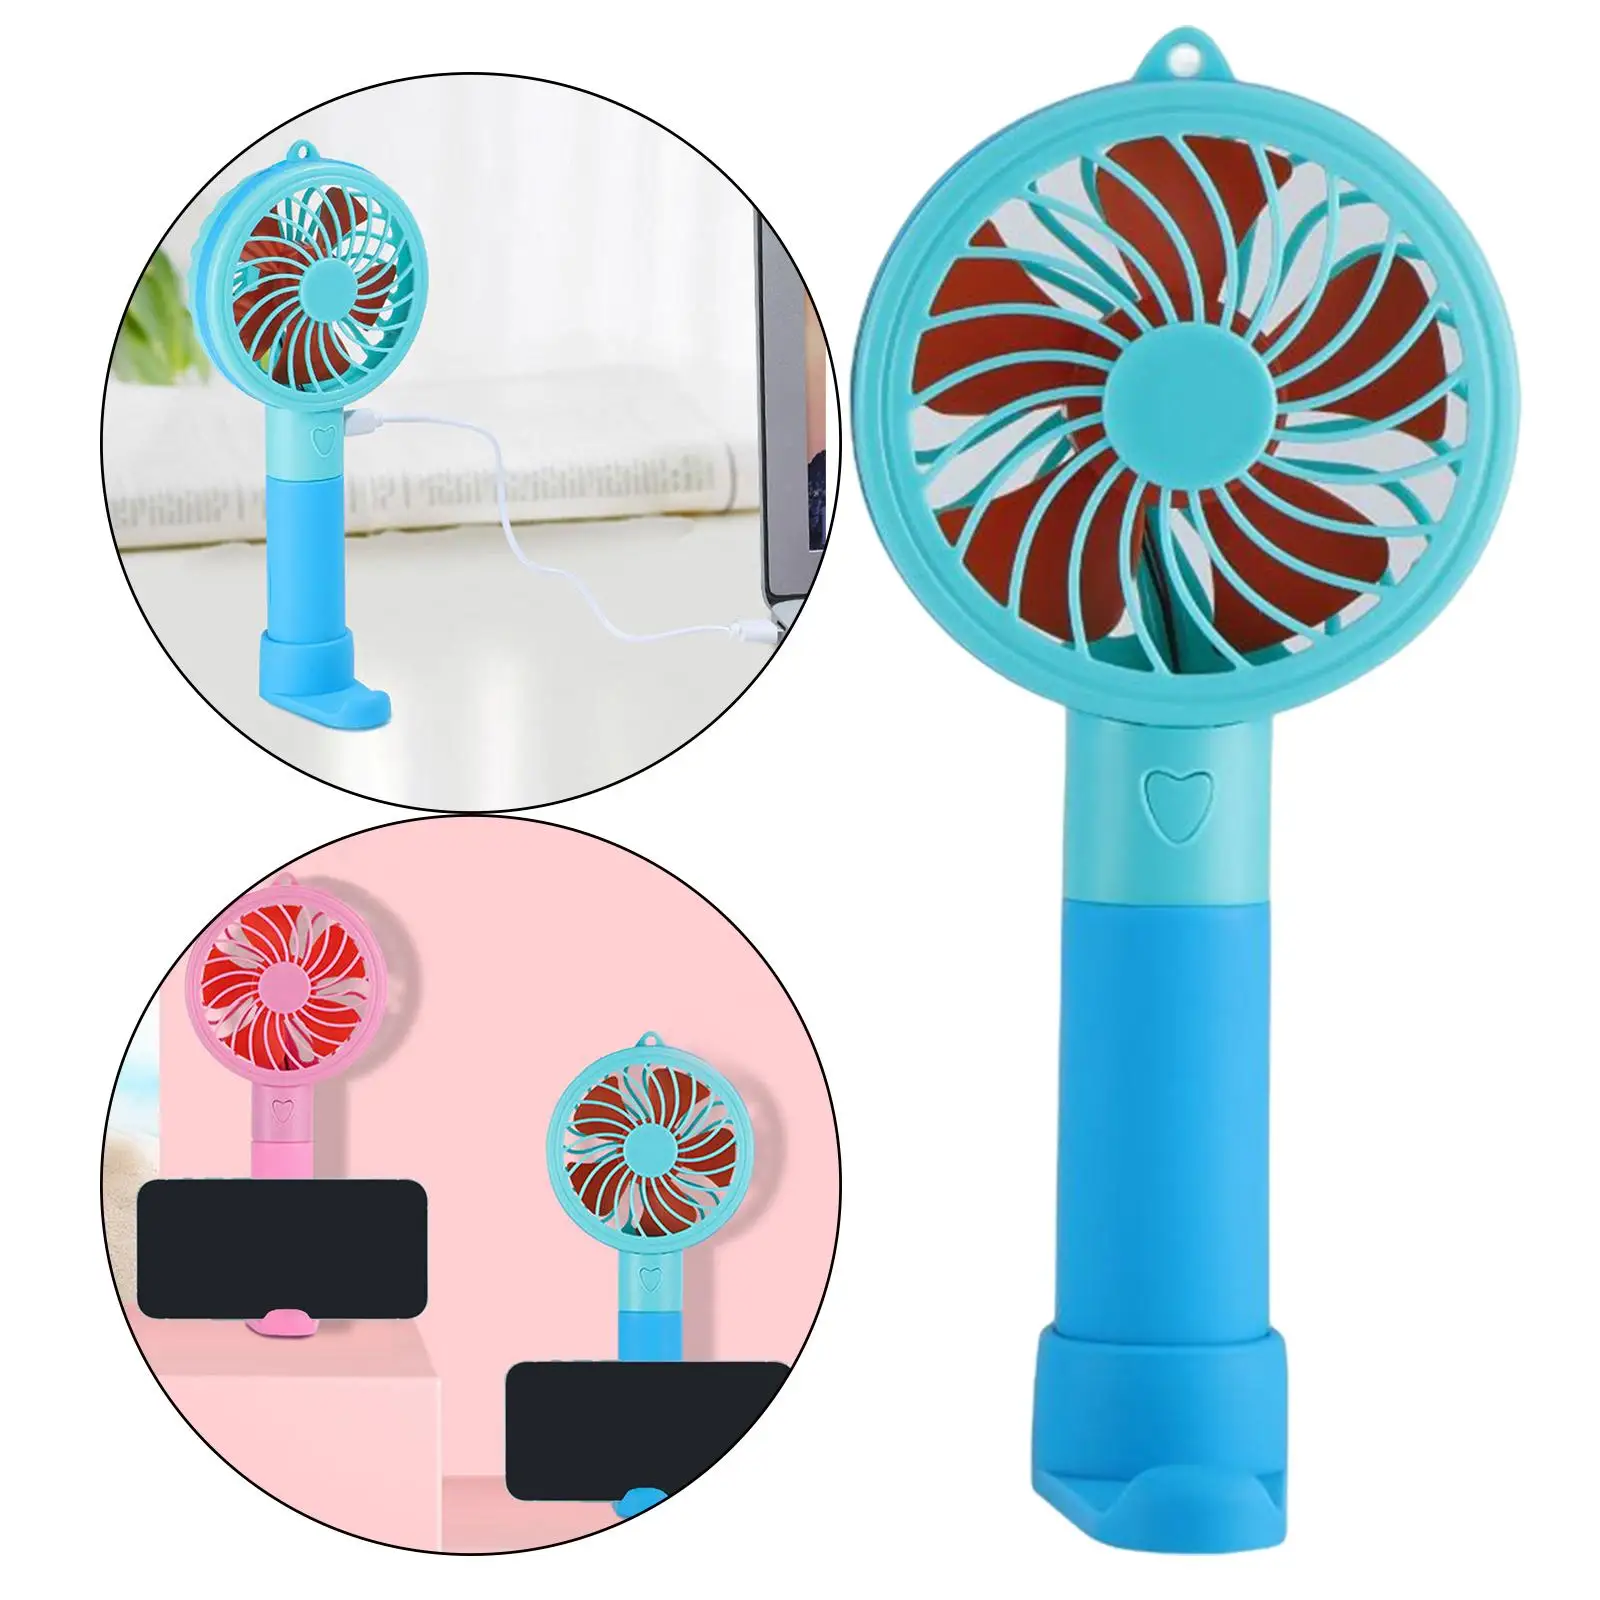 Mini Handheld Fan 3 Speed Personal Cooling Fan Makeup Eyelash Fan USB Rechargeable 6-8 Hours Operated for Home Office Travel